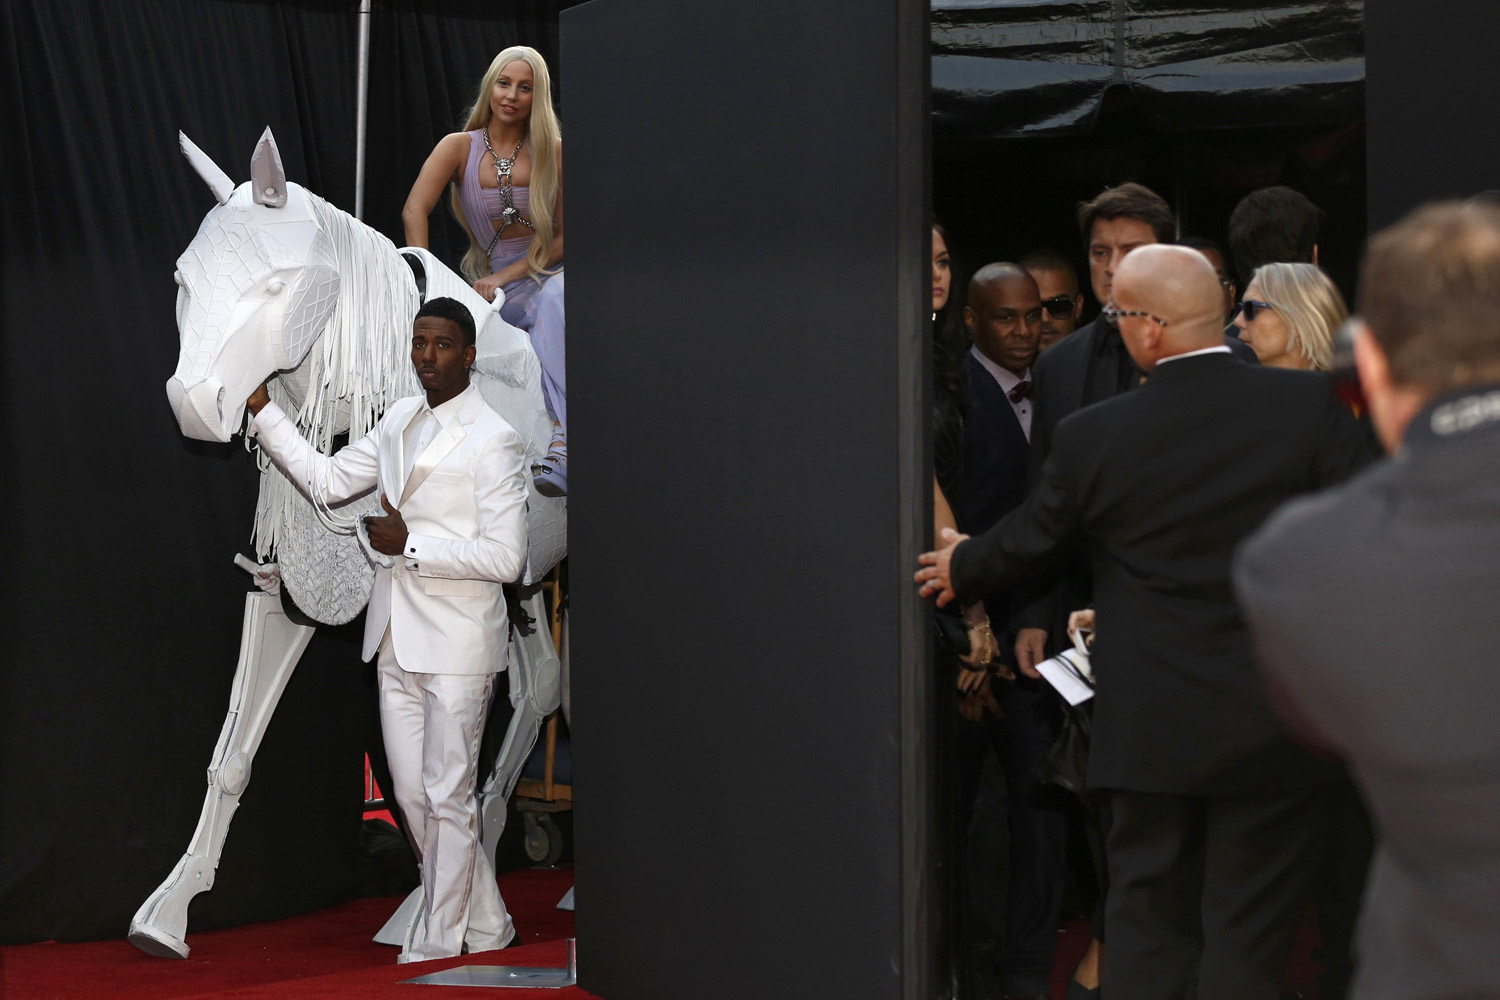 Musician Lady Gaga arrives atop a horse puppet at the 41st American Music Awards in Los Angeles